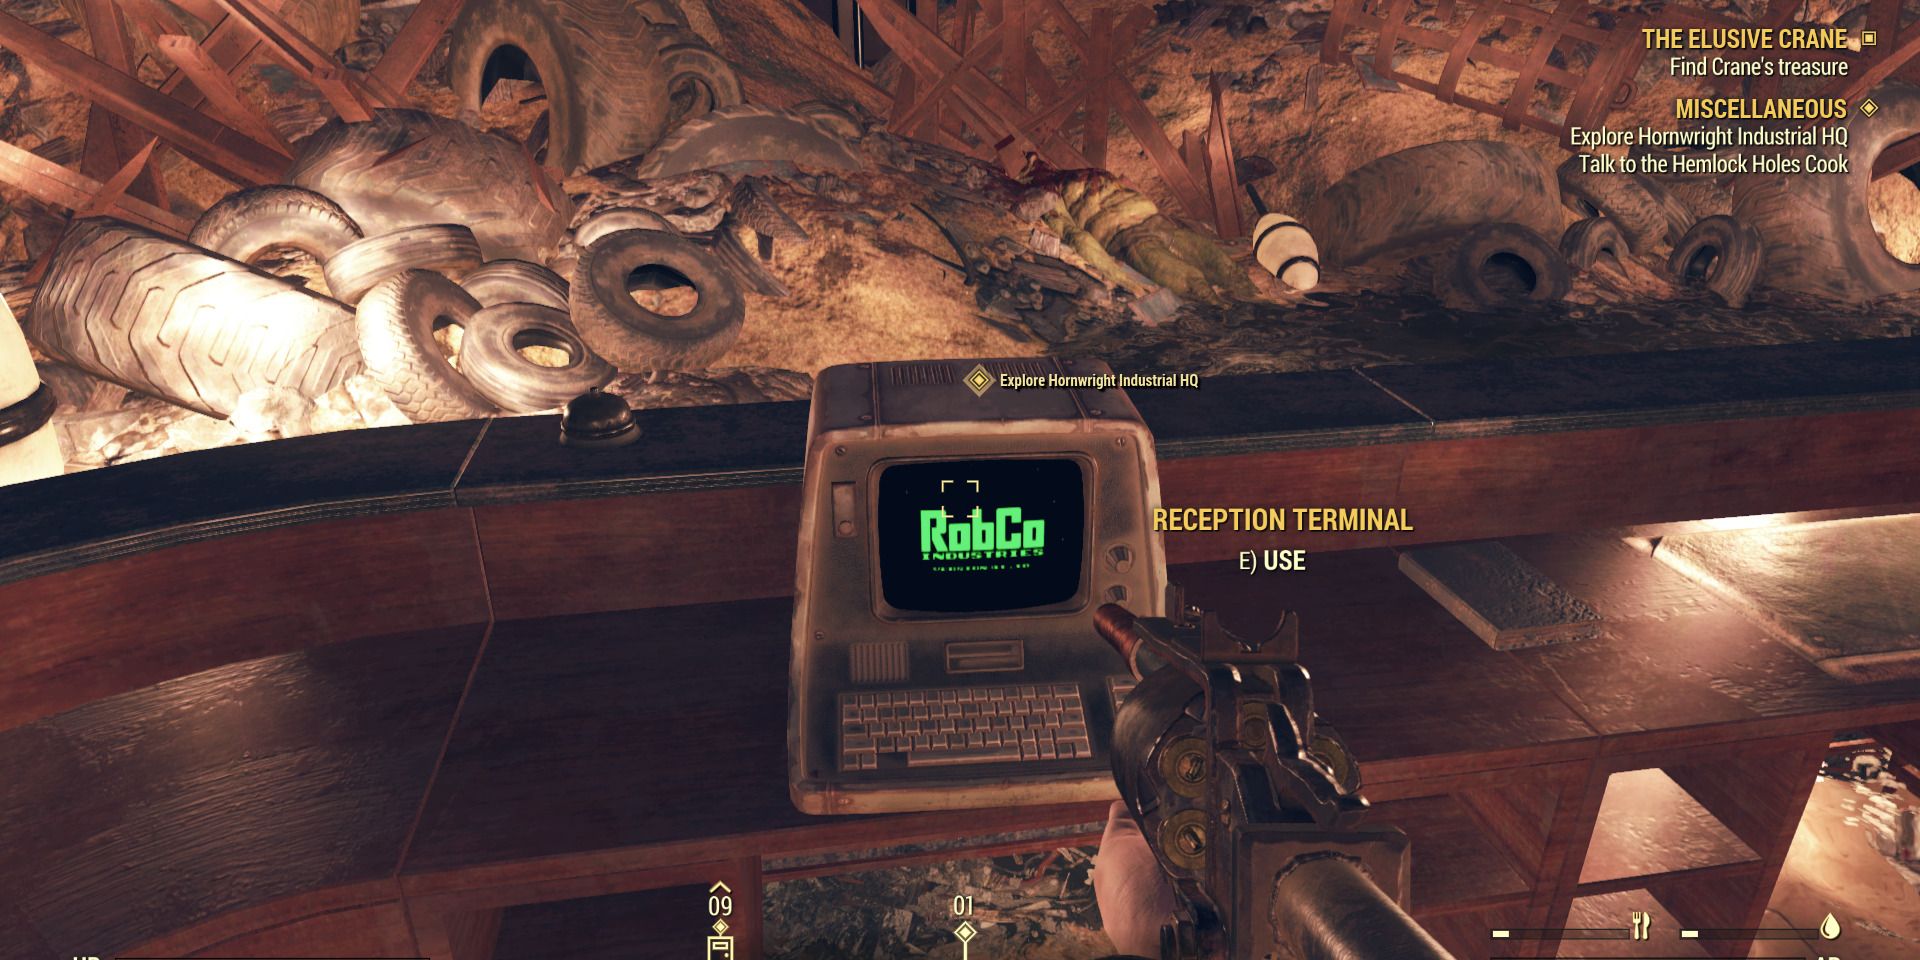 Image of the reception terminal in the HQ in Fallout 76